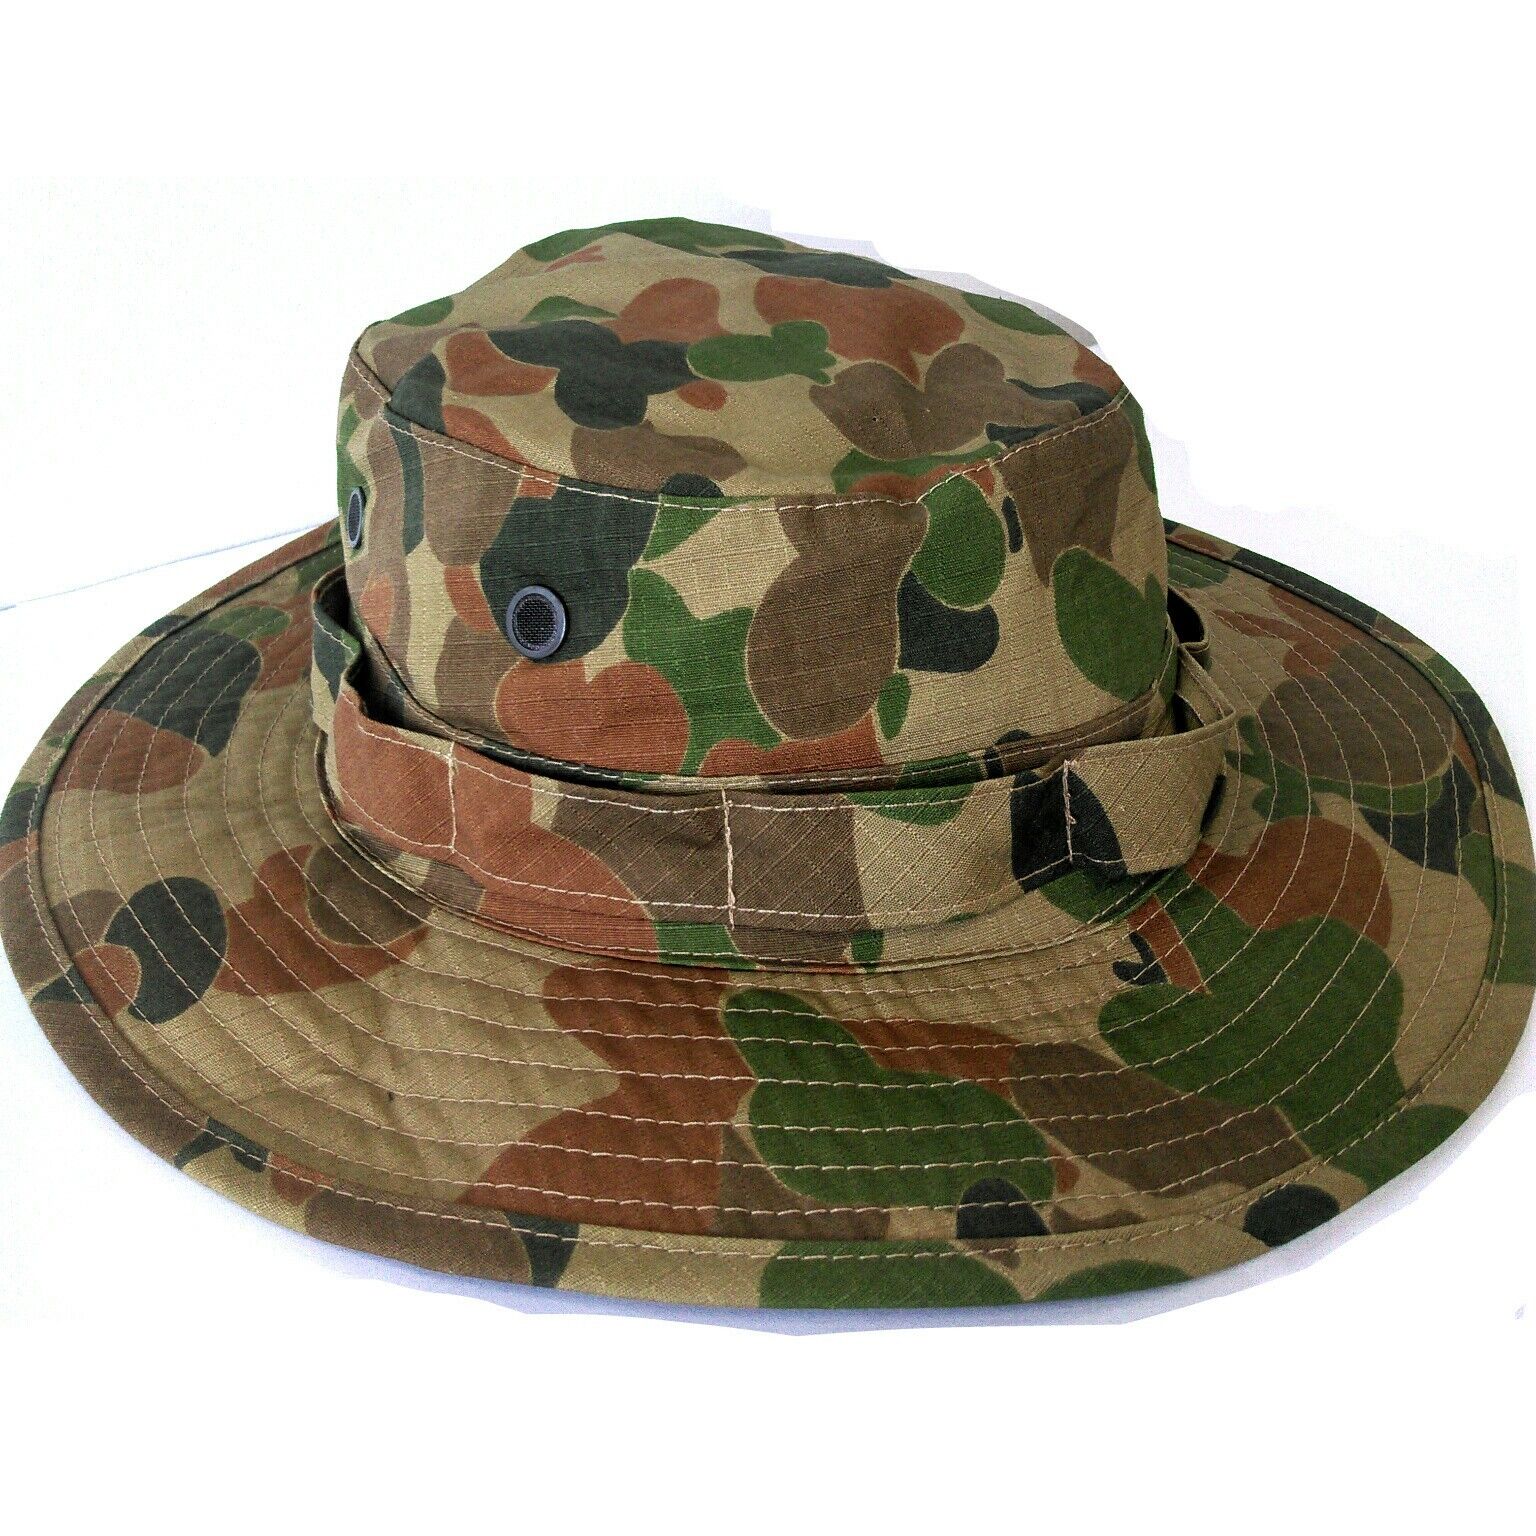 AUSCAM BOONIE HAT MEDIUM 100% COTTON DOUBLE LAYER BRIM WITH VENTS ARMY